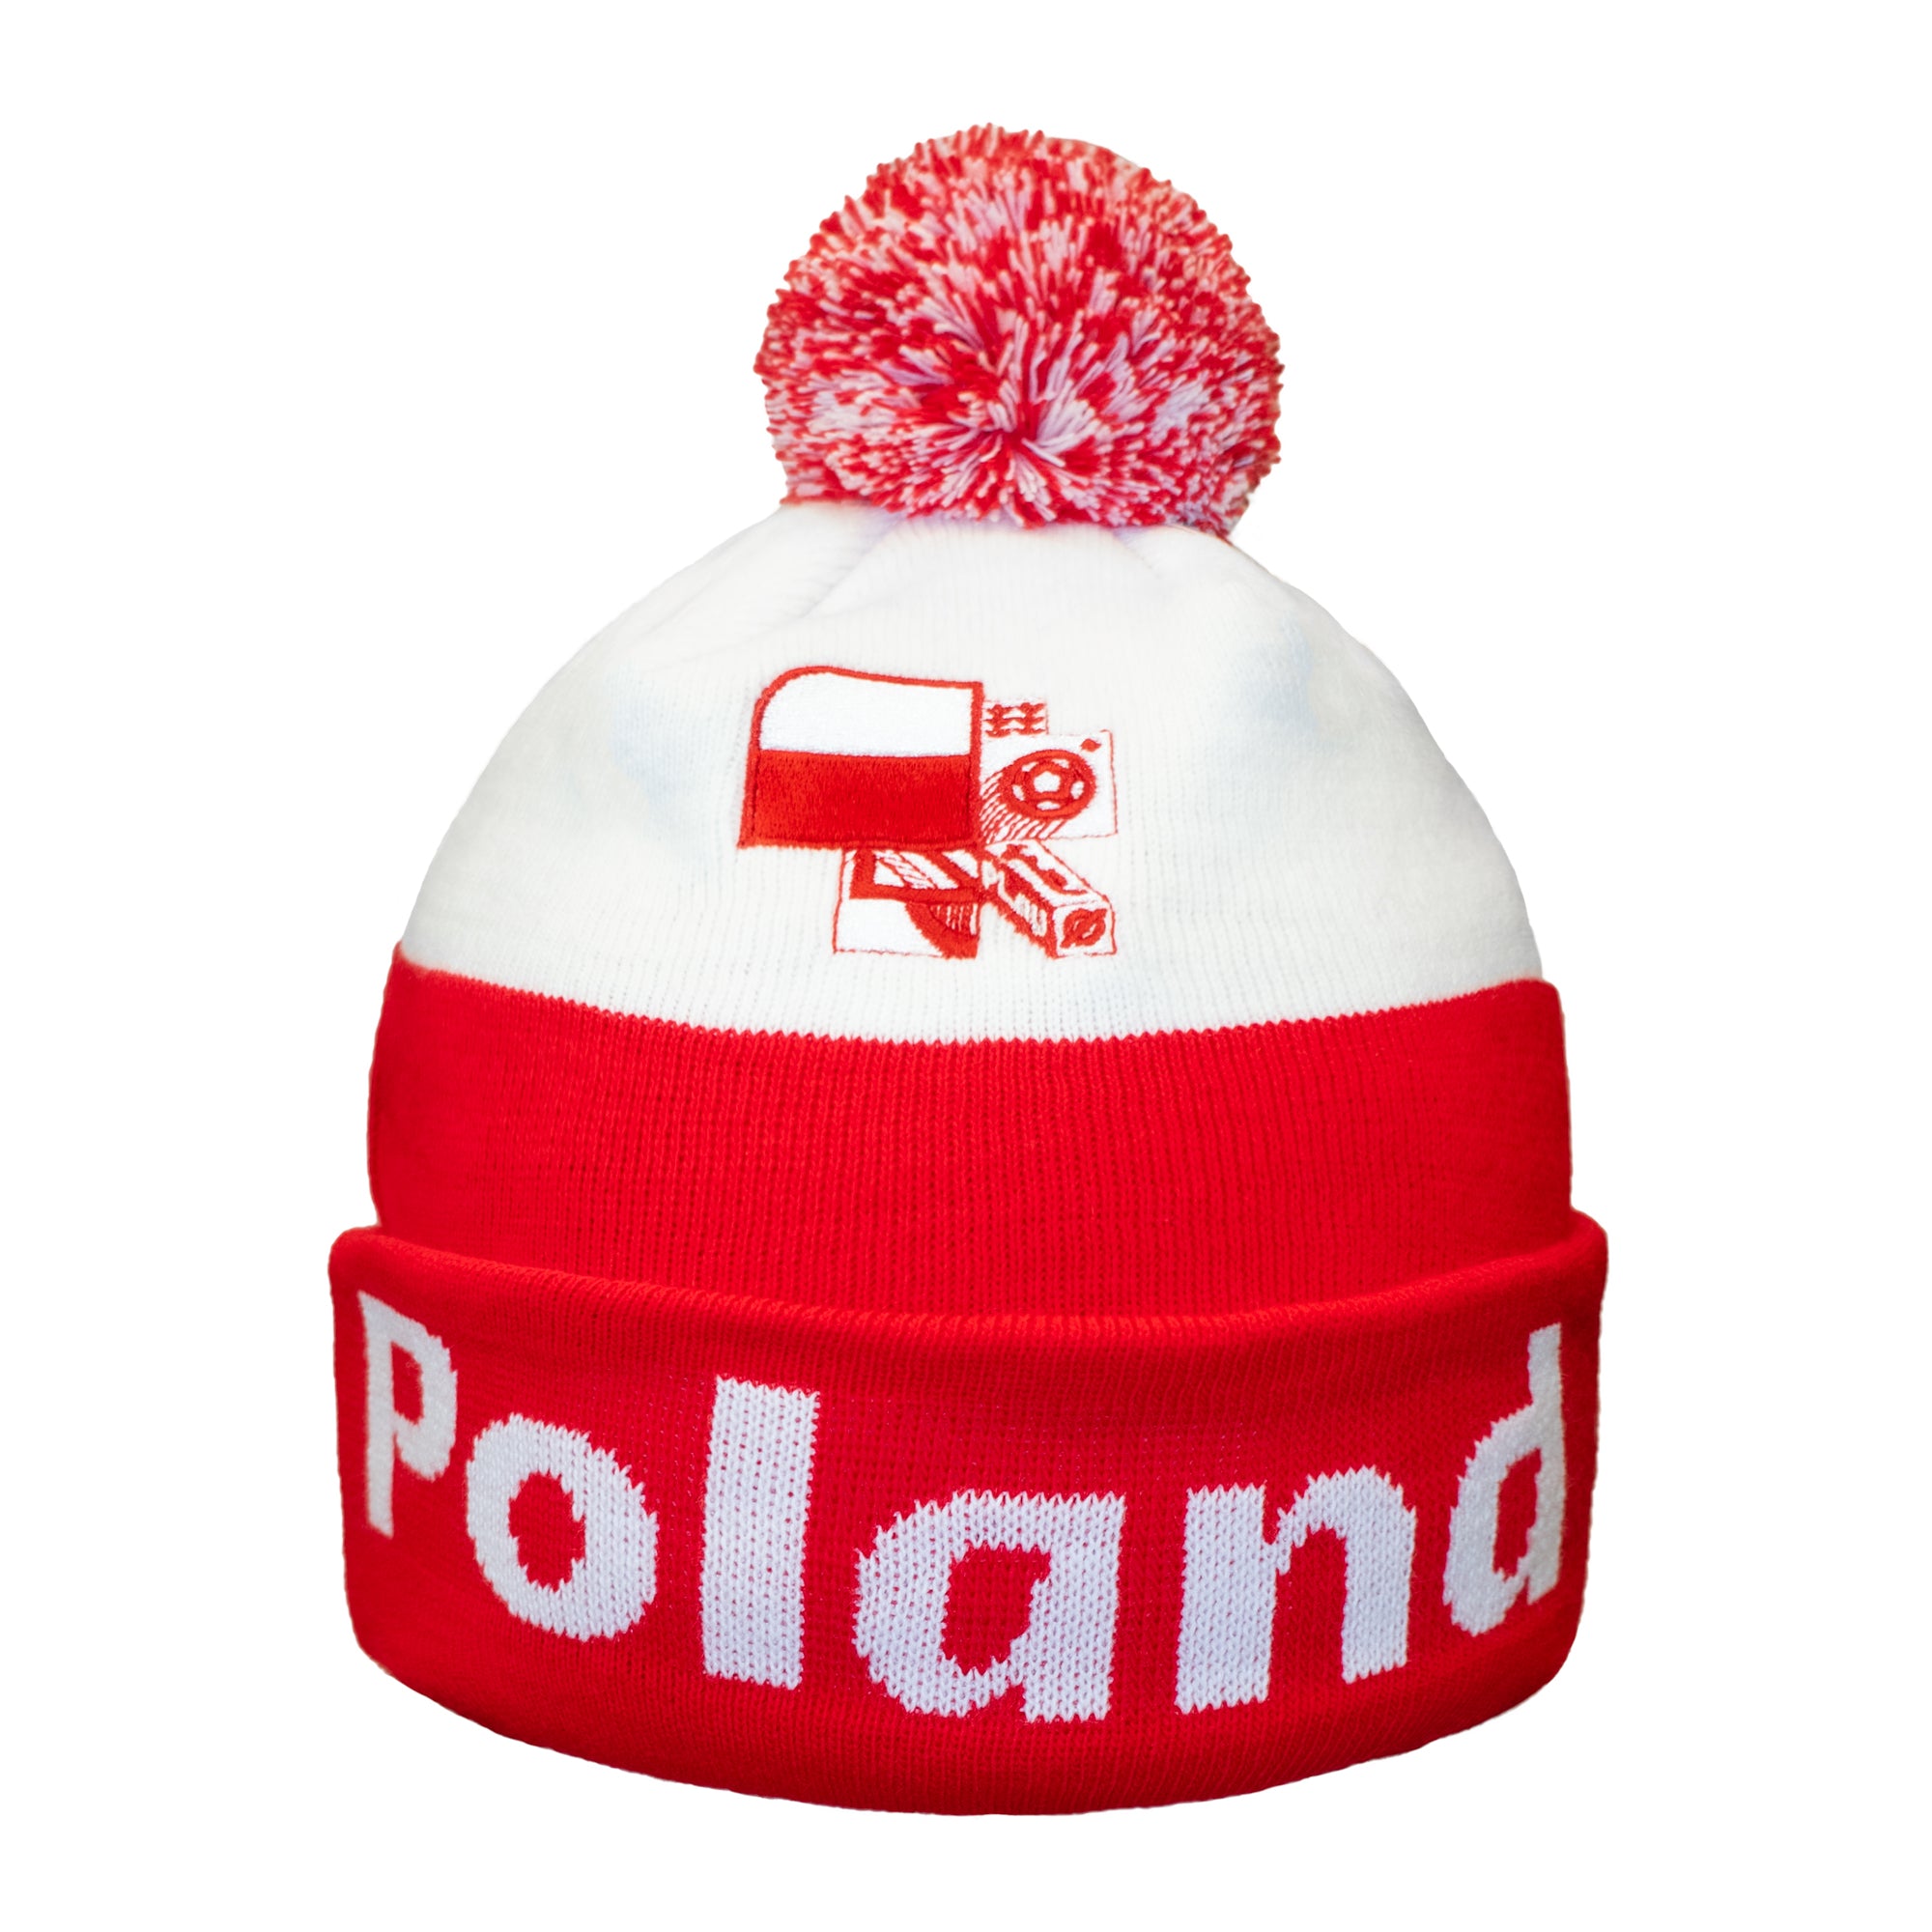 beanie-poland-worldcup-productimage.jpg